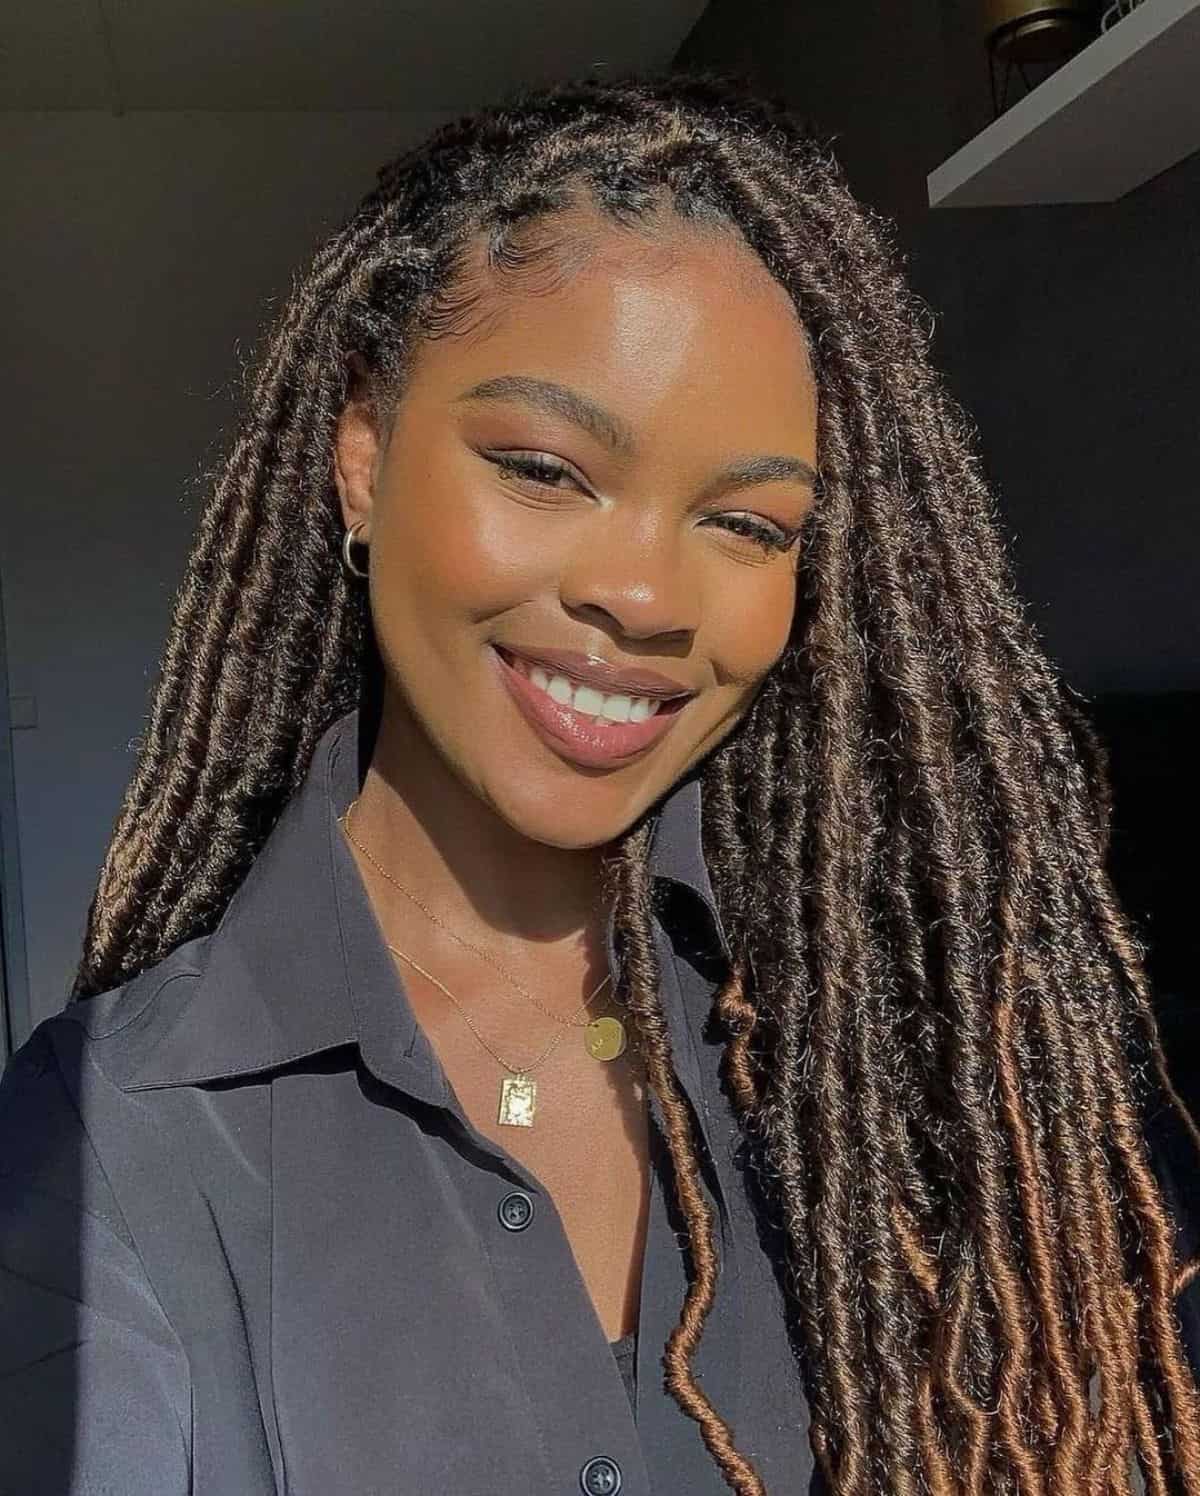 Ombre Locs woman's hairstyle.